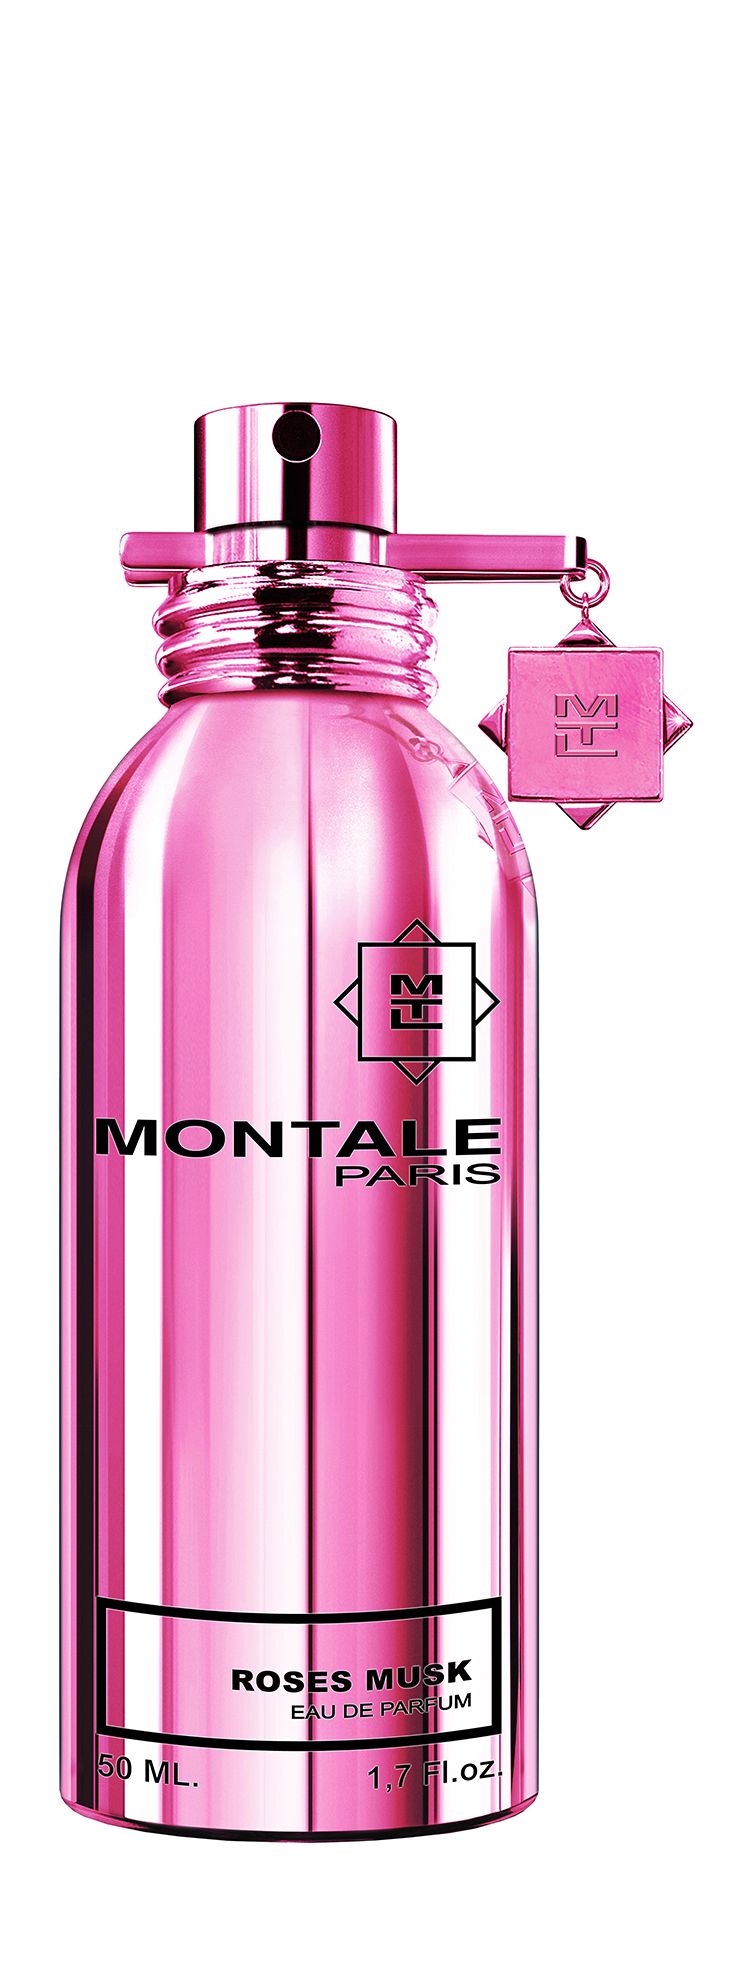 Roses musk парфюмерная вода. Montale Crystal Flowers. Парфюмерная вода Montale Crystal Flowers 50 мл. Montale Roses Musk. Montale Wild Pears.